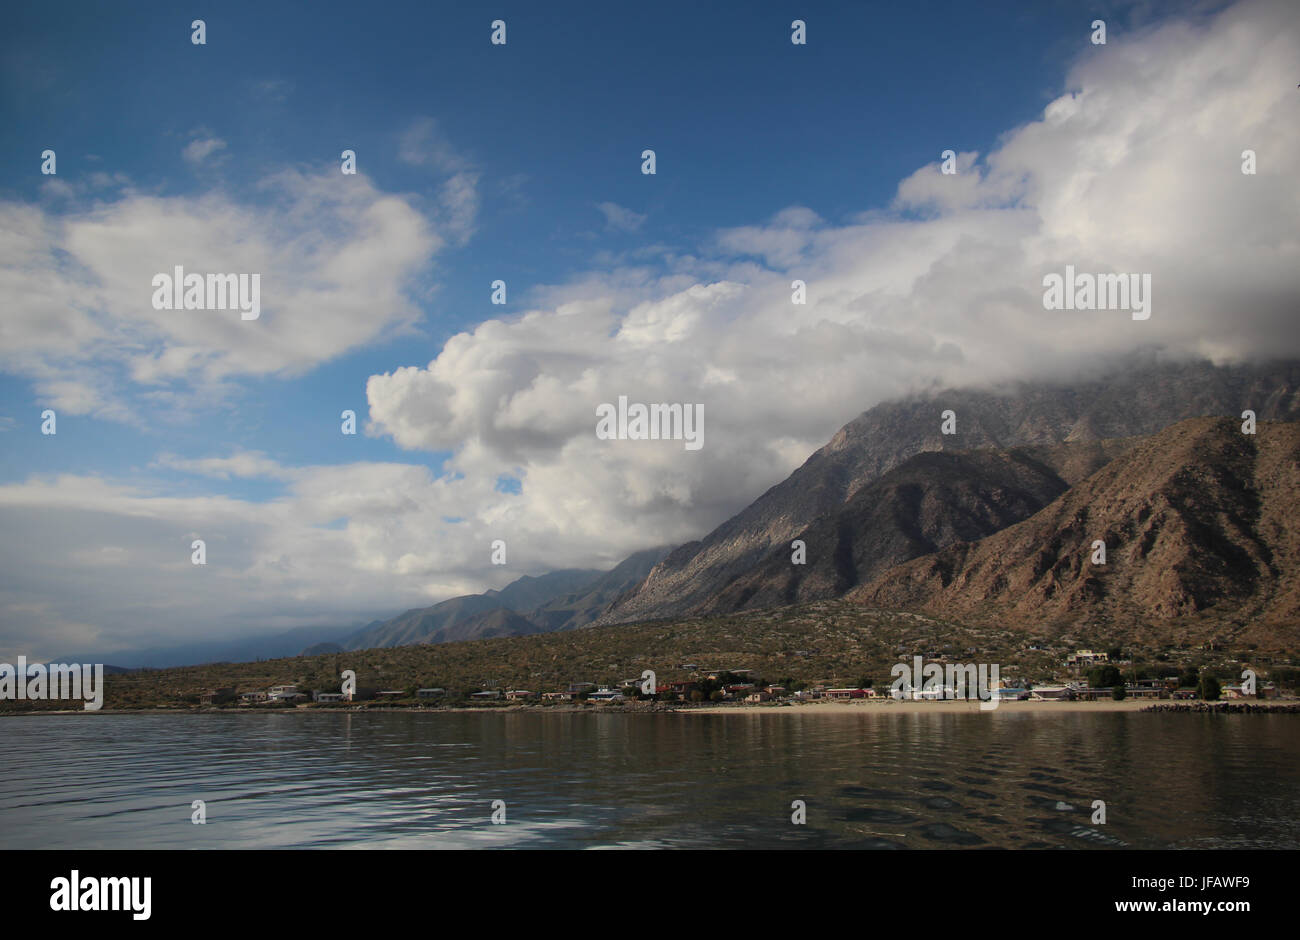 View of Los Angeles Bay in Baja California Norte from the water; topped with white clouds, blue sky, rugged mountains rise up behind the village, Stock Photo